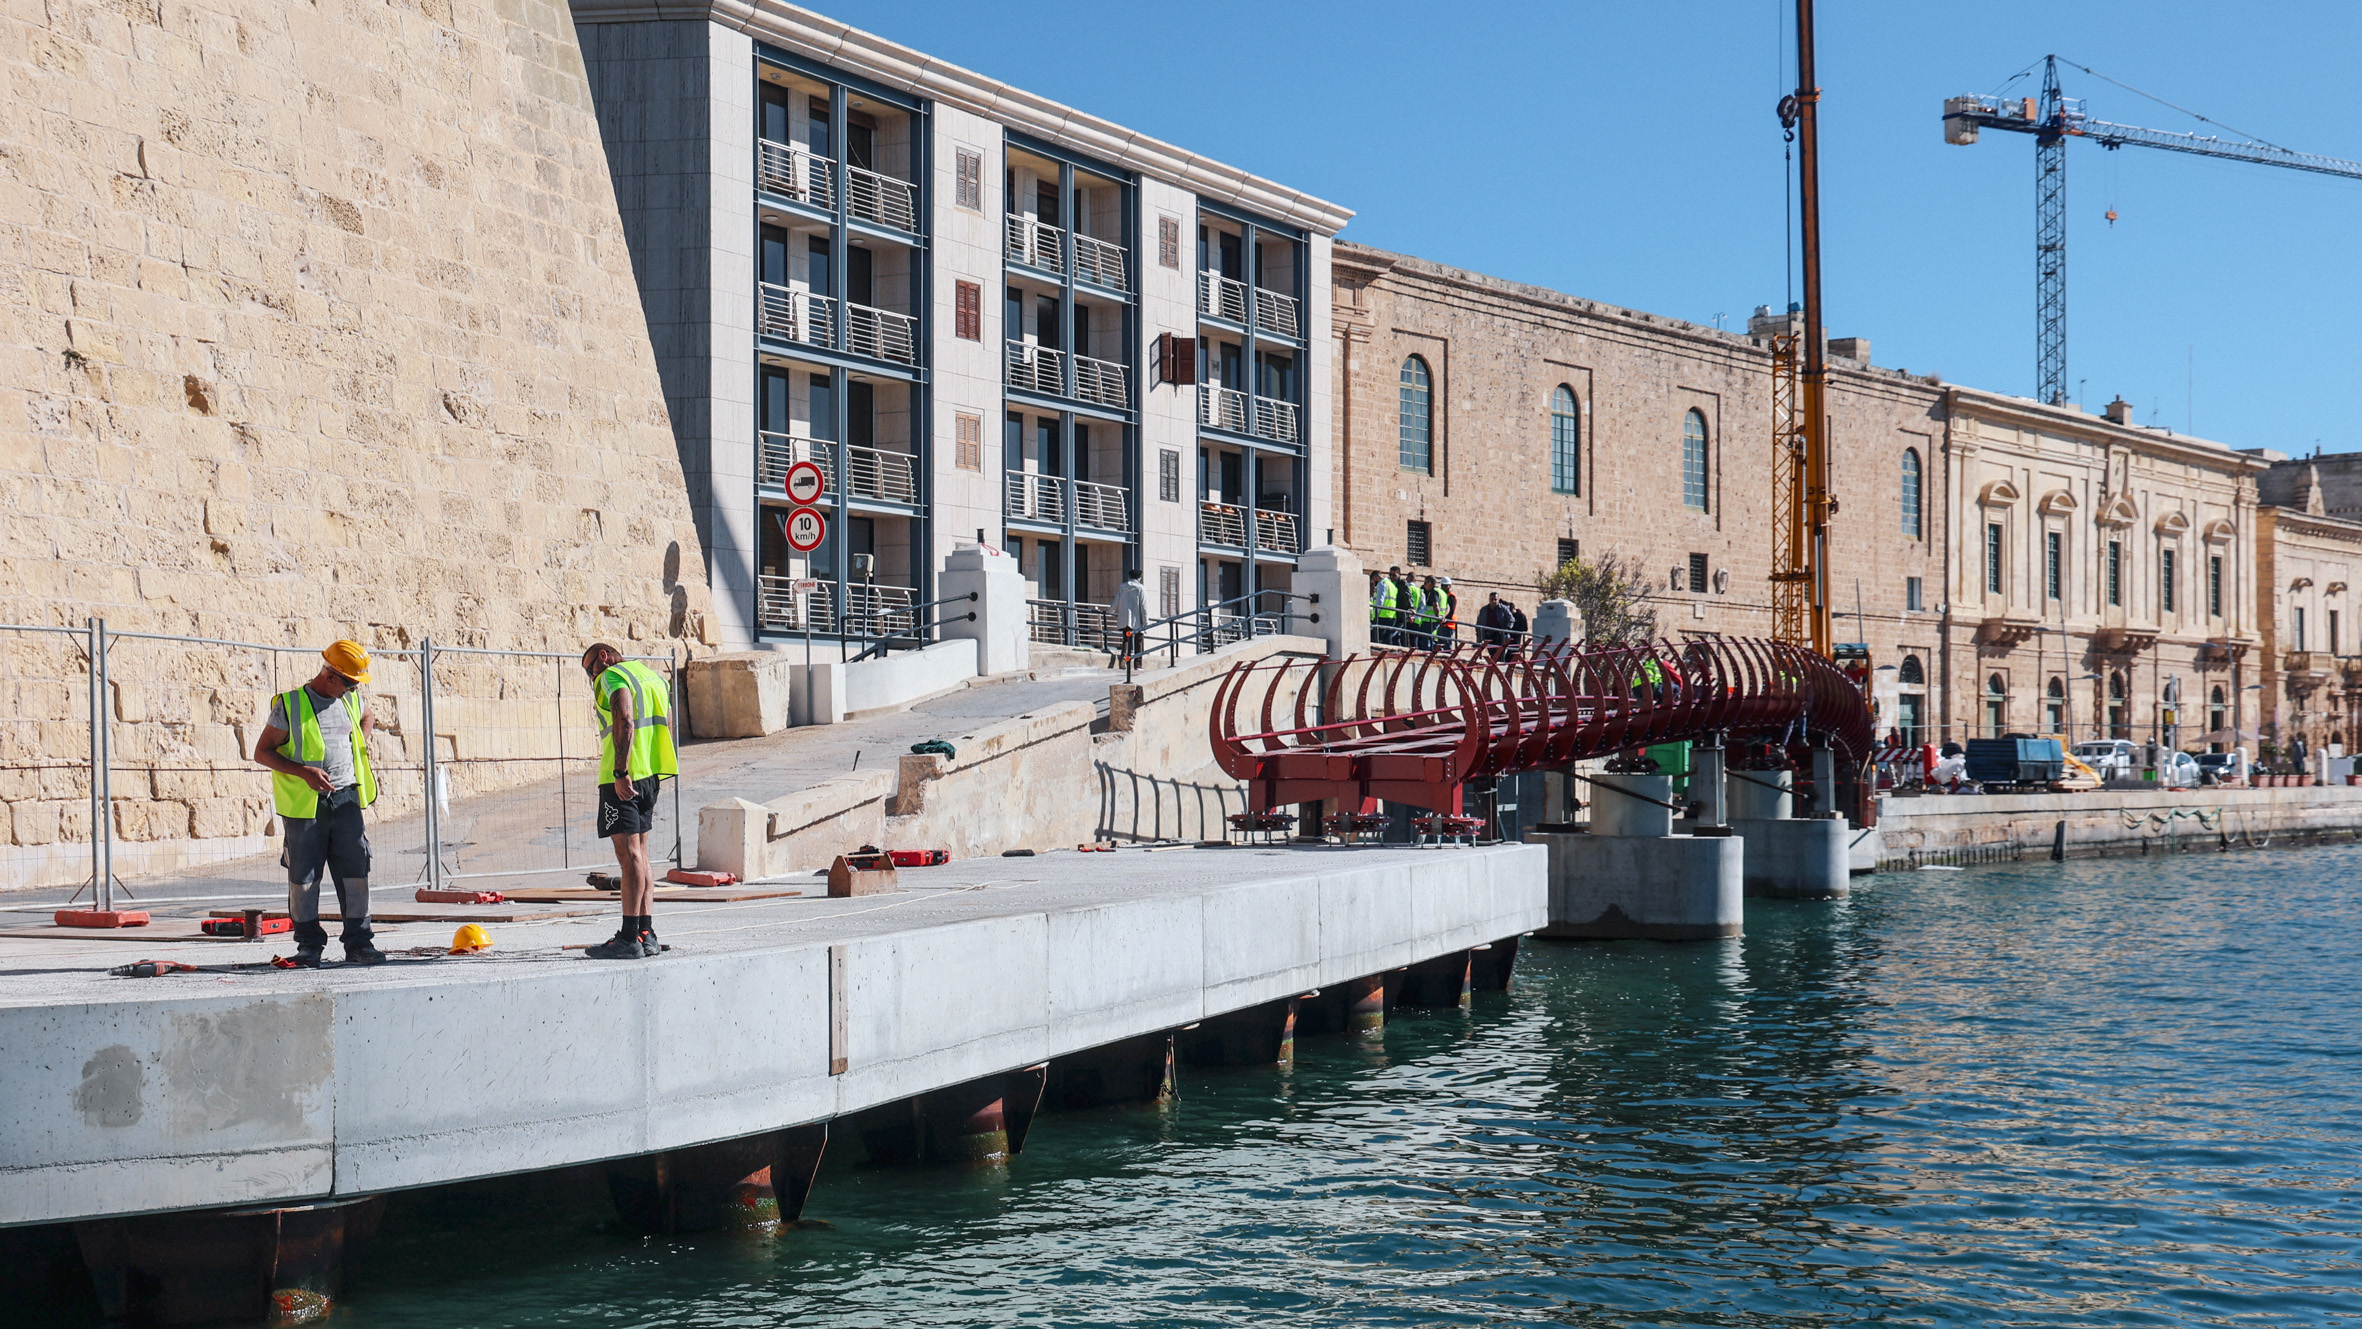 Infrastructure Malta installed the pedestrian bridge at the Fort St Angelo site